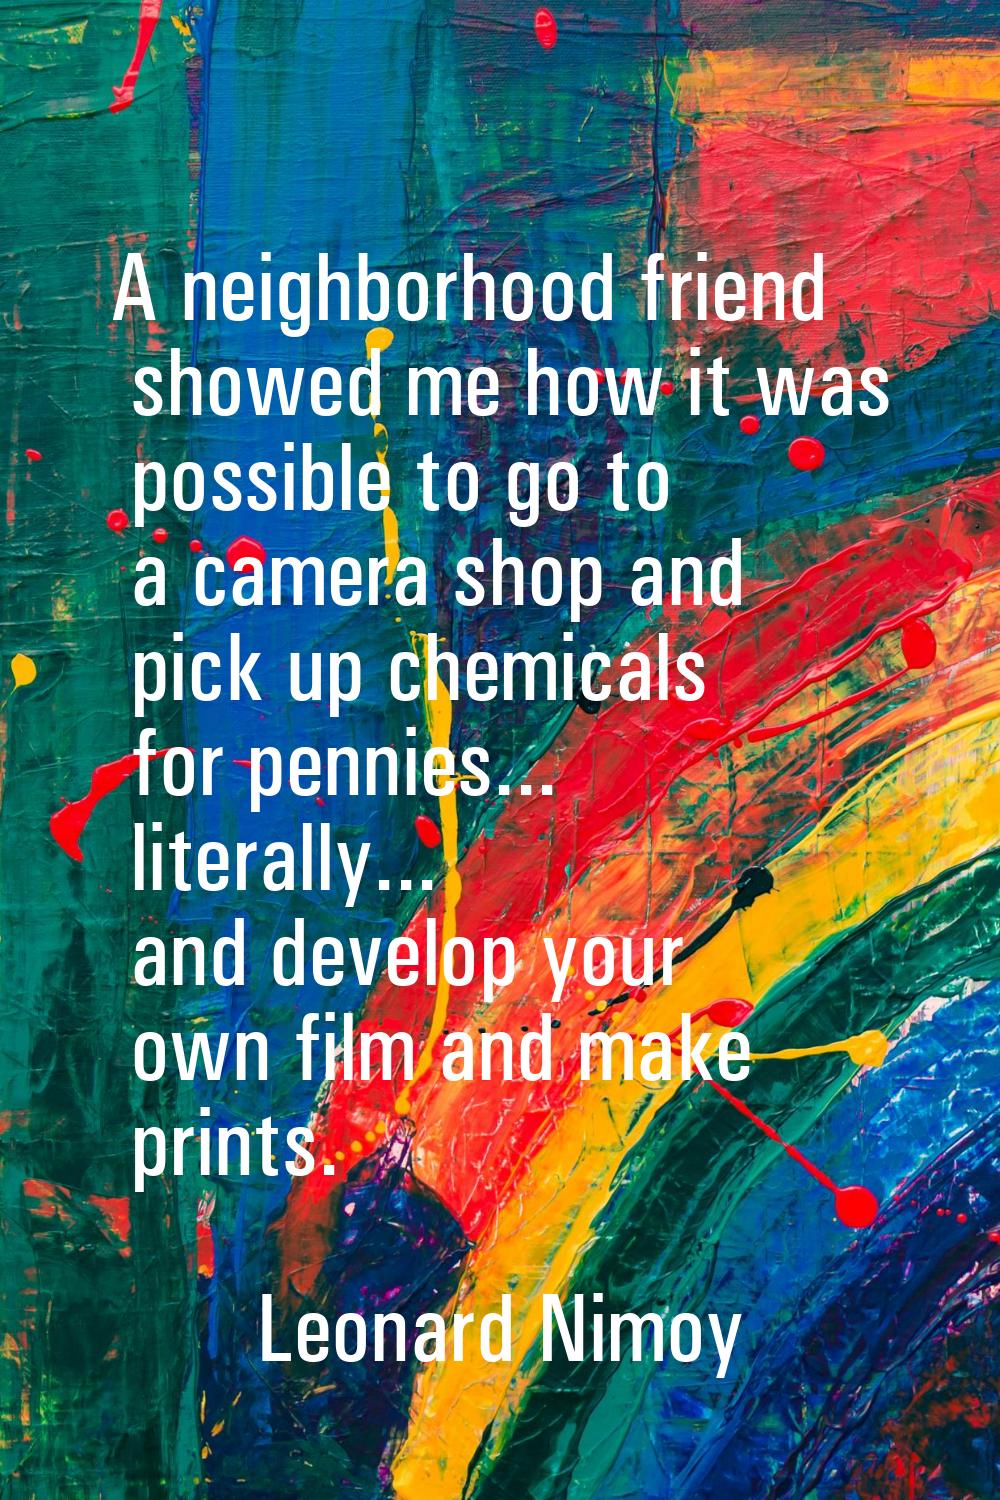 A neighborhood friend showed me how it was possible to go to a camera shop and pick up chemicals fo